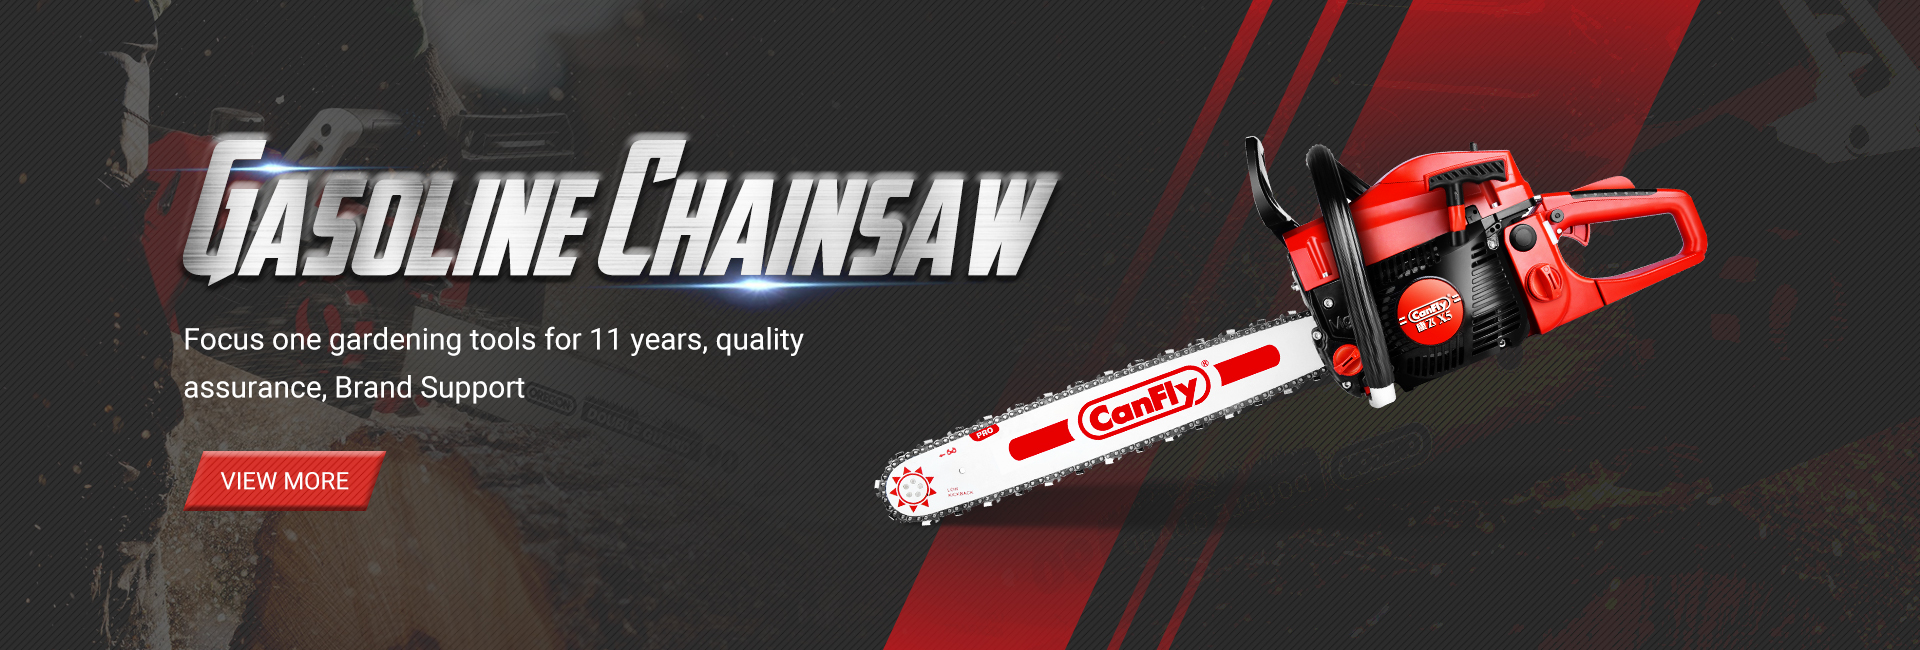 https://www.chinacanfly.com/canfly-x5-top-quality-chinese-5800-58cc-petrol-chainsaw-tree-cutting-machine.html